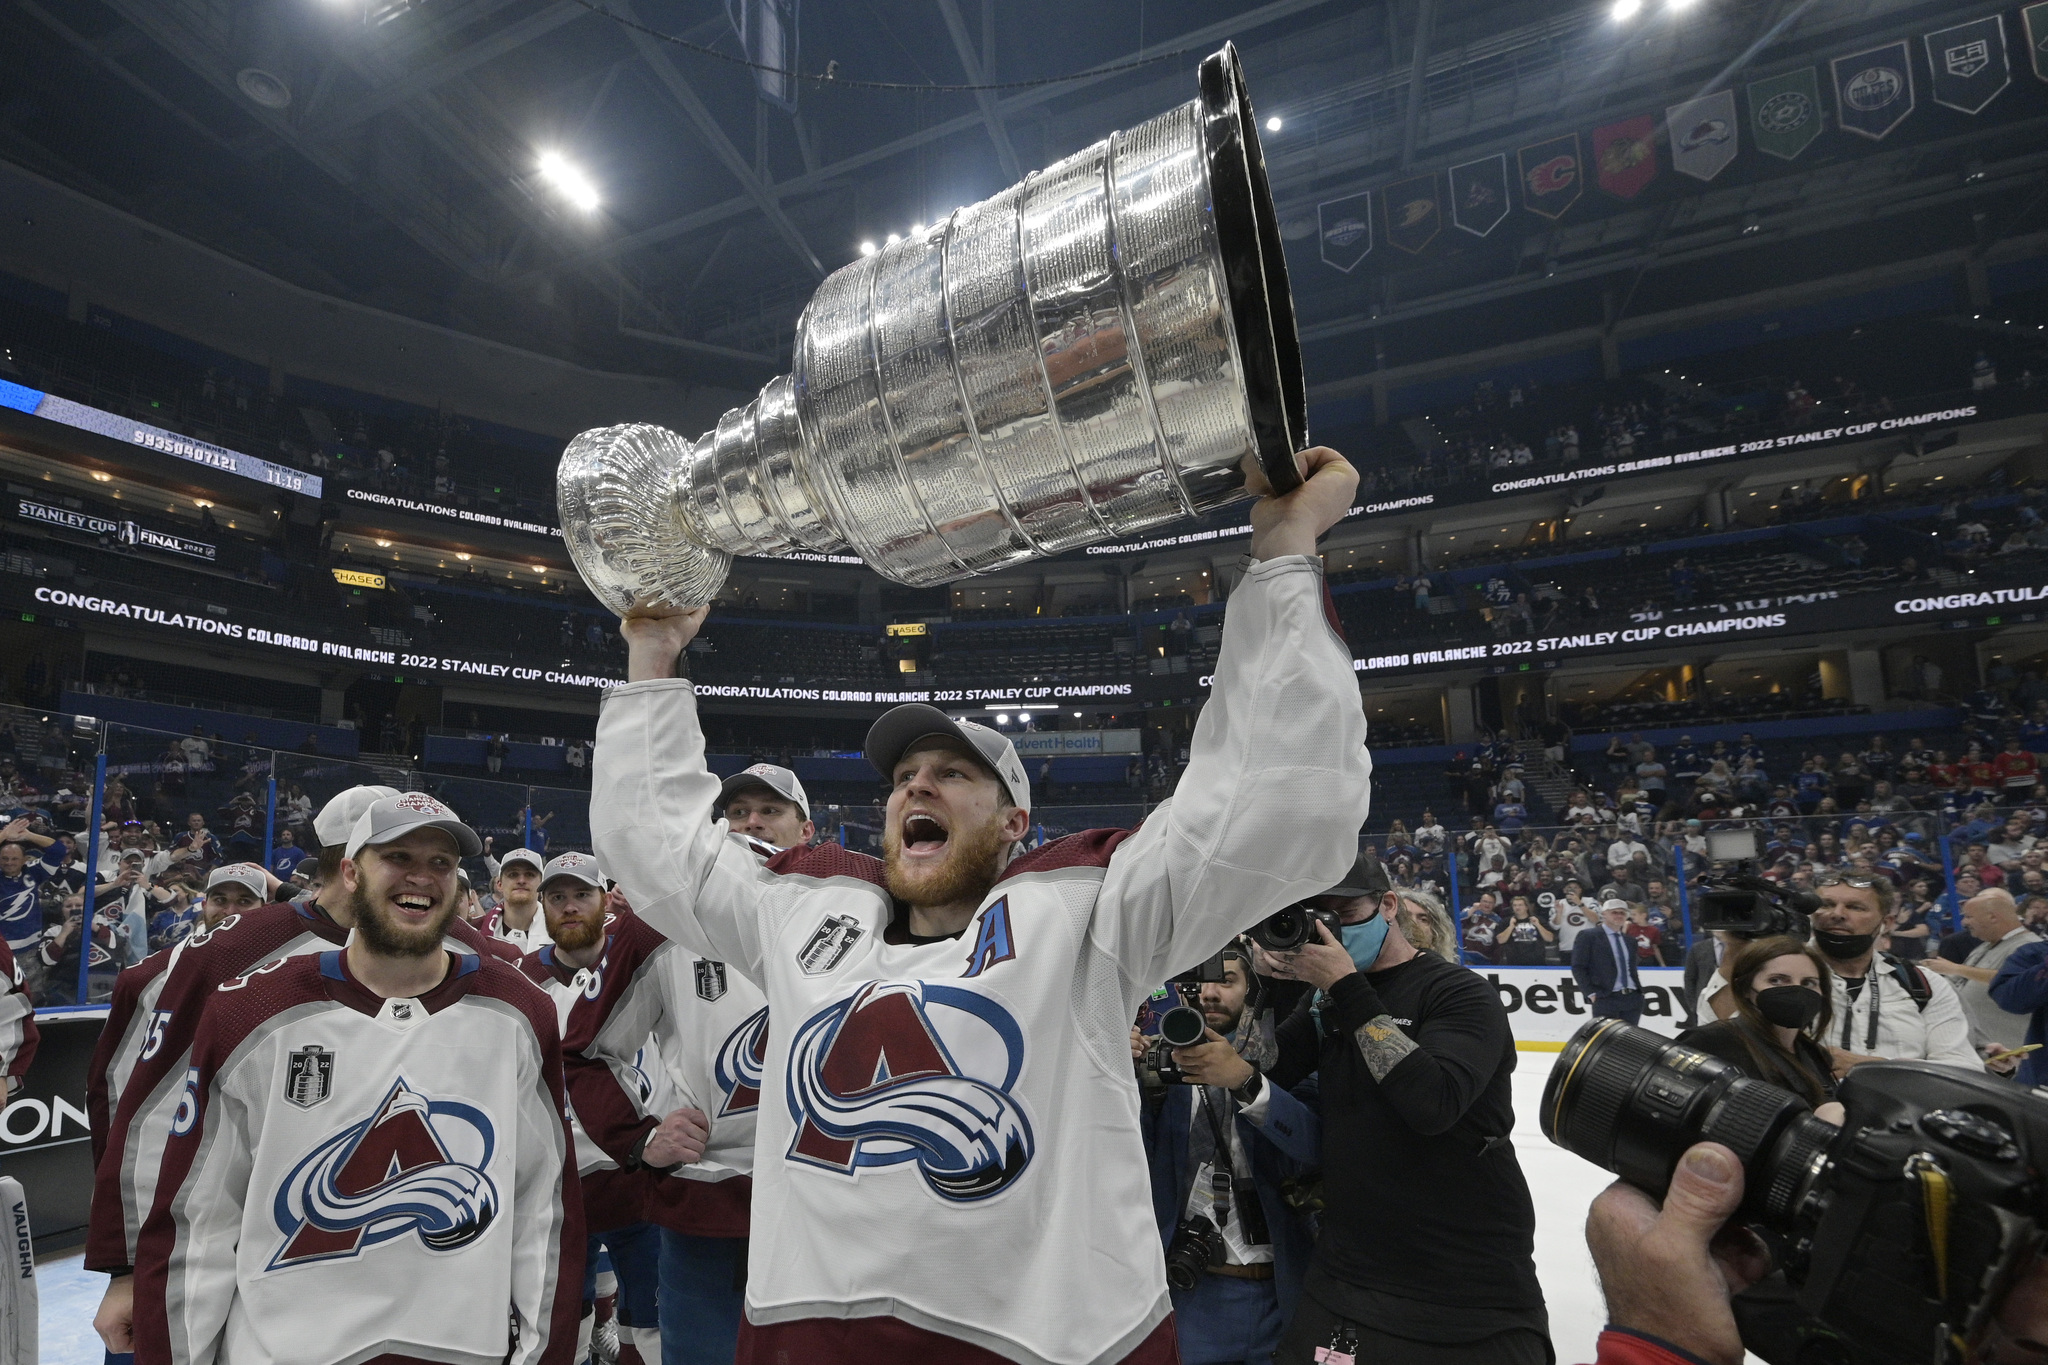 Colorado Avalanche center Nathan MacKinnon lifts the Stanley Cup